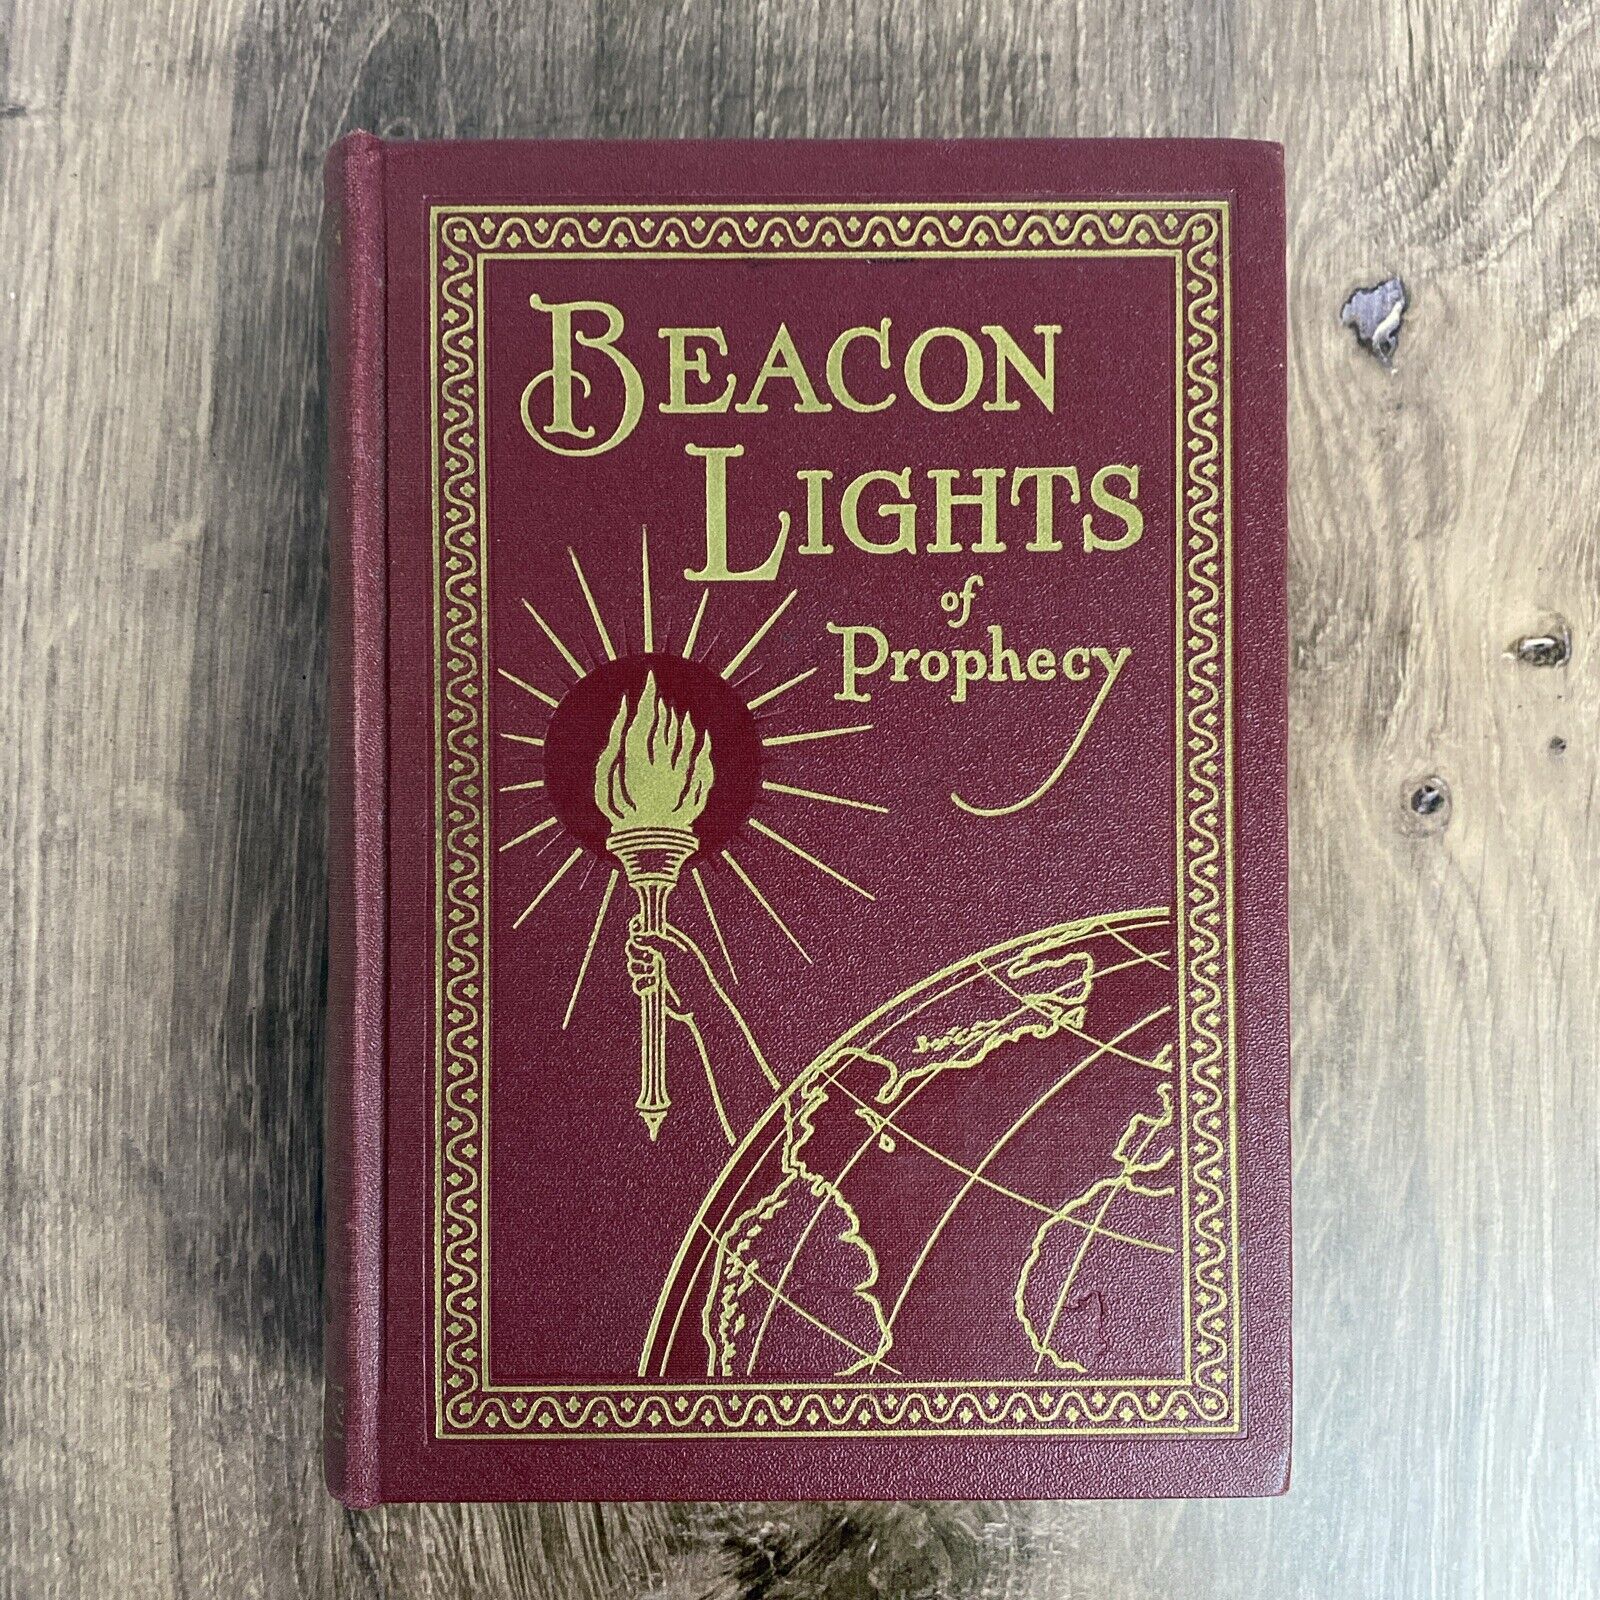 Vtg 1935 1st ed. BEACON LIGHTS of PROPHECY by W.A. Spicer Seventh Day Adventist 